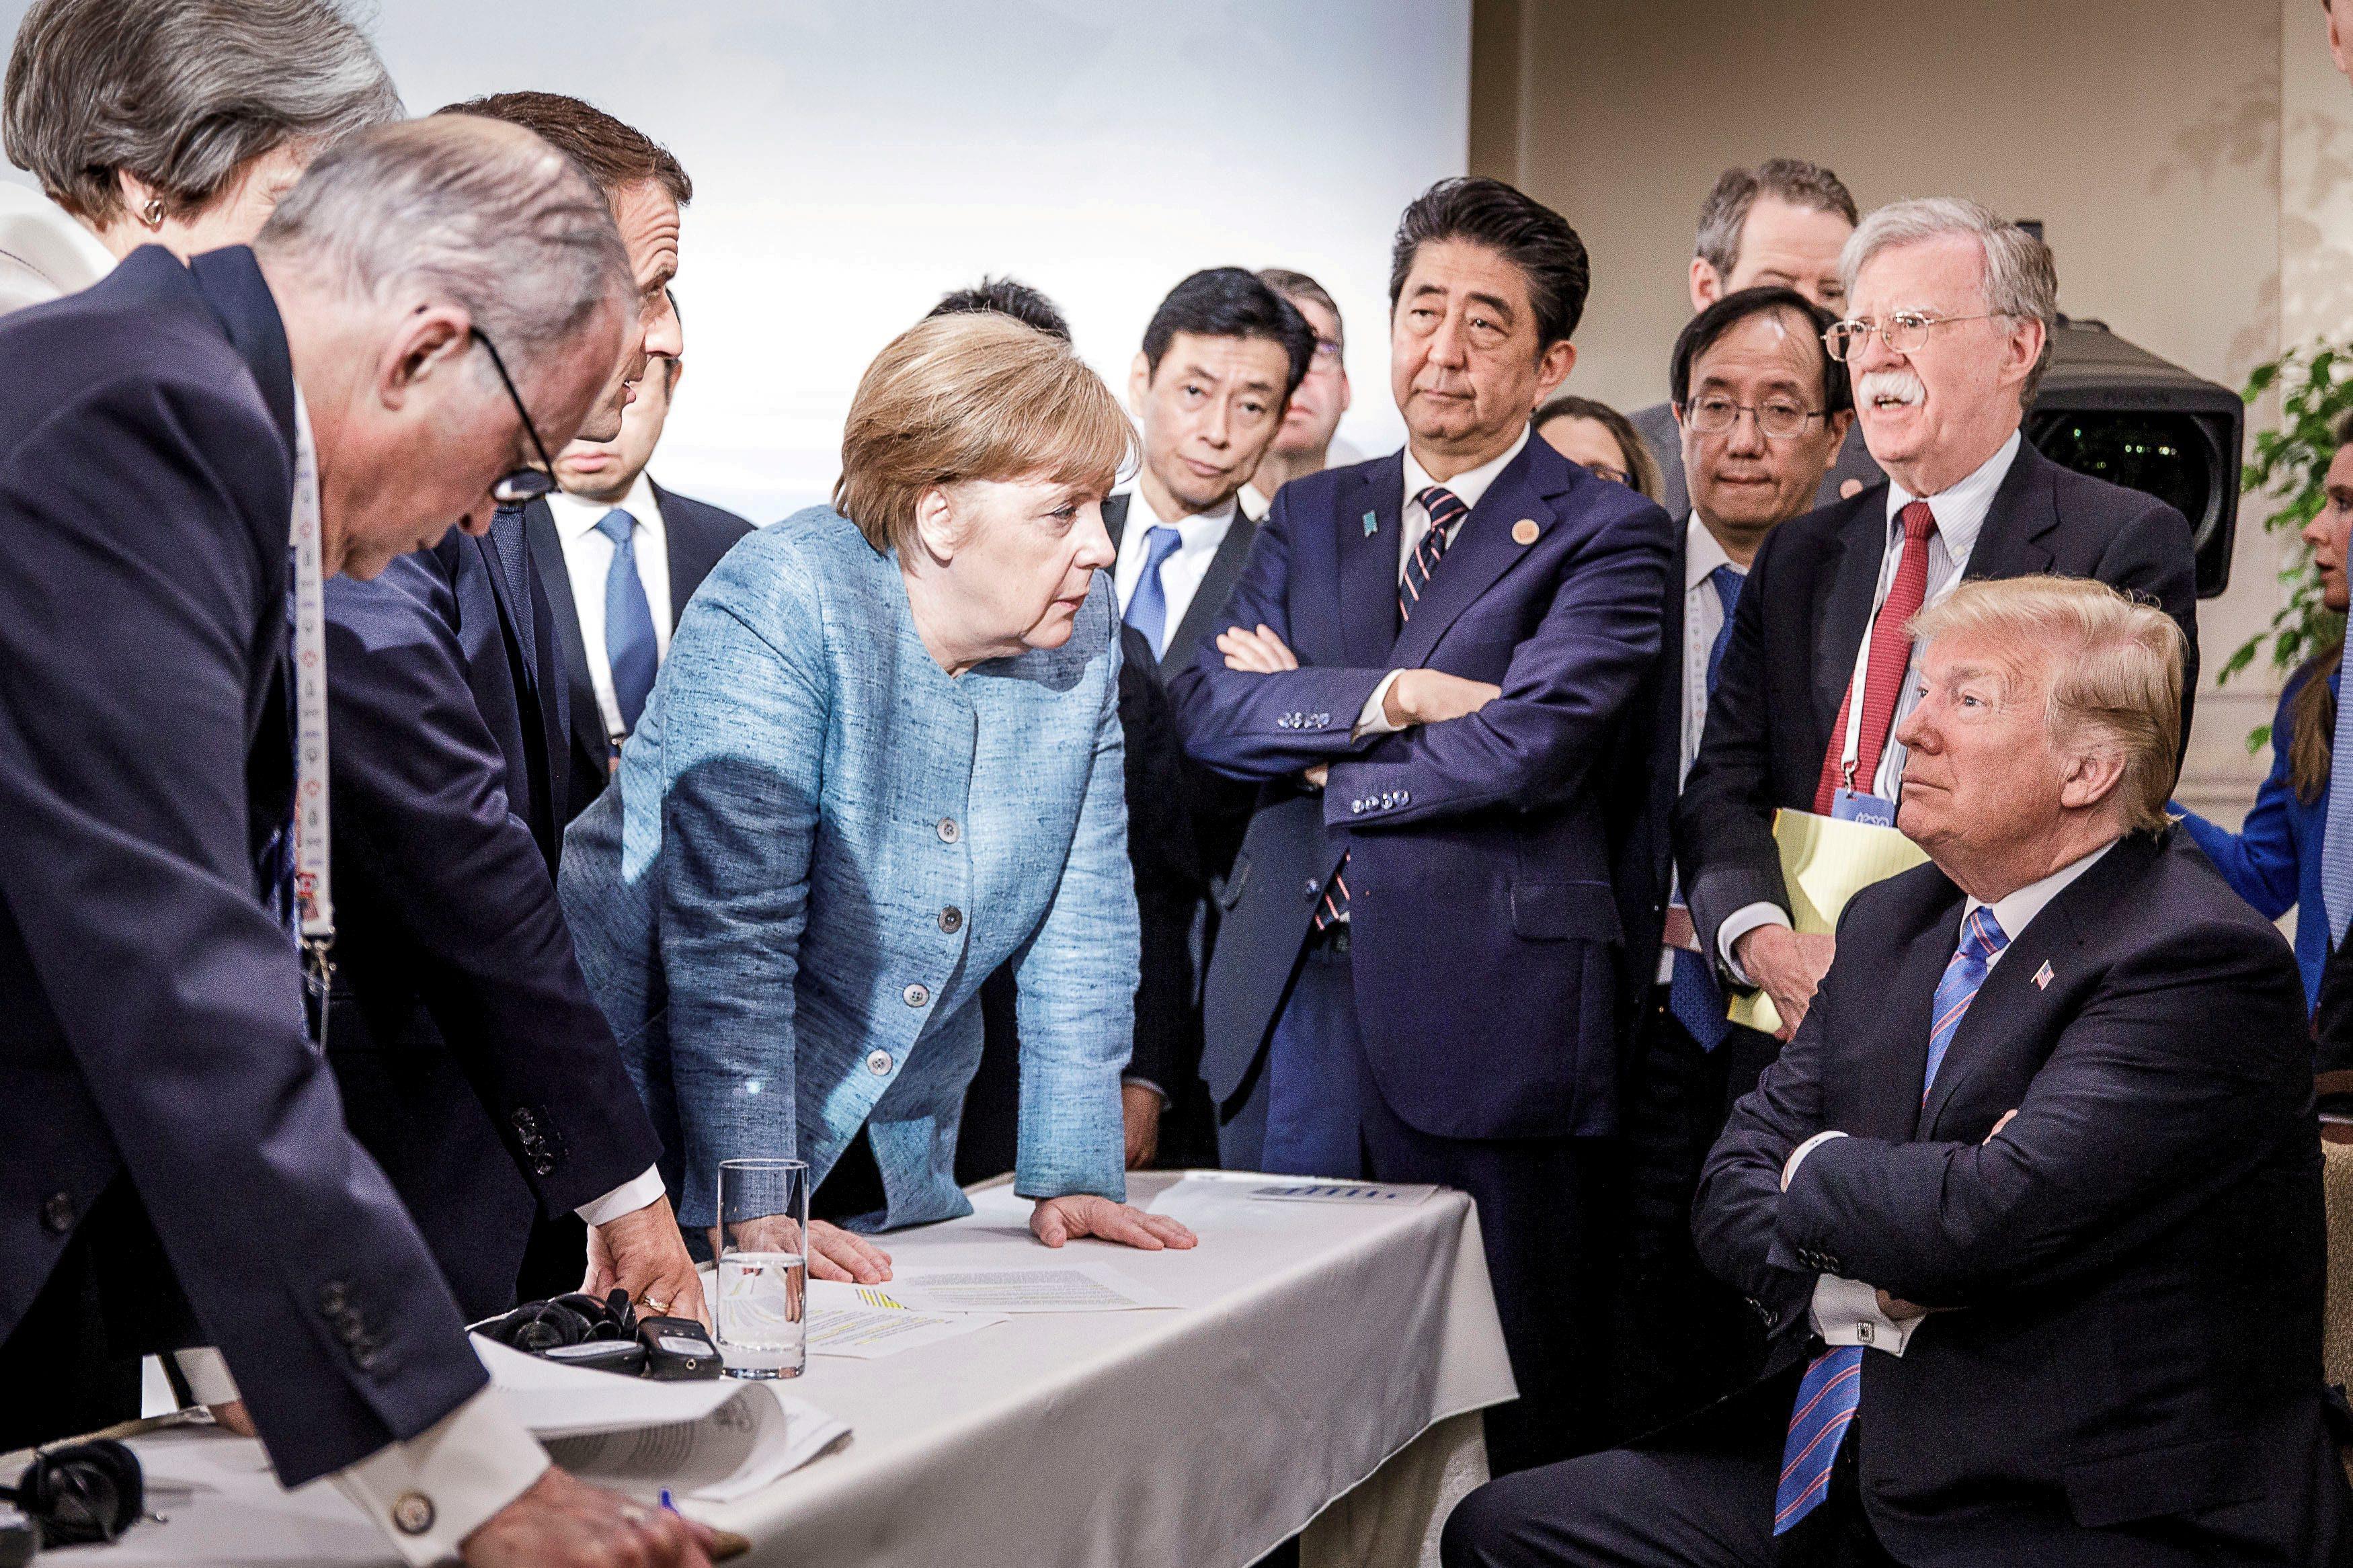 German Chancellor Merkel speaks to U.S. President Trump during the second day of the G7 meeting in C